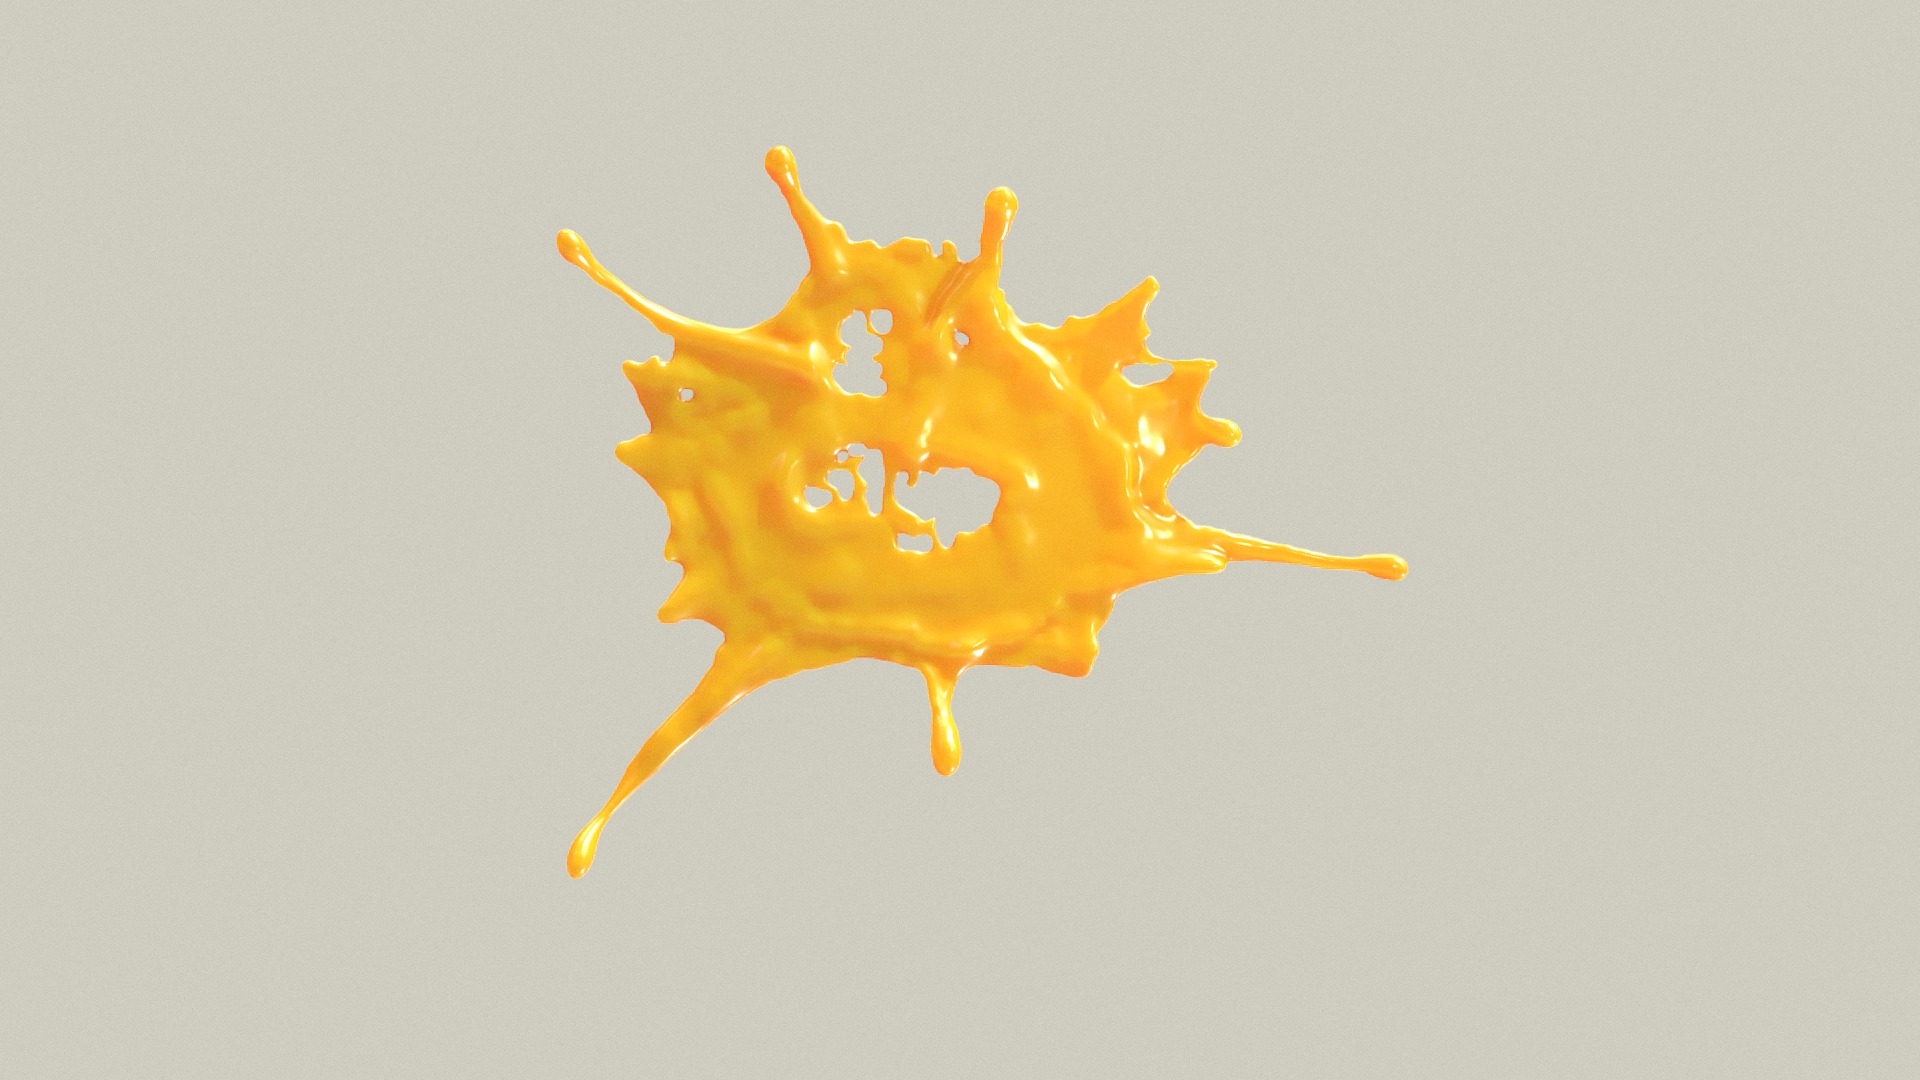 3D model Splat 1 - This is a 3D model of the Splat 1. The 3D model is about a yellow starfish on a white background.